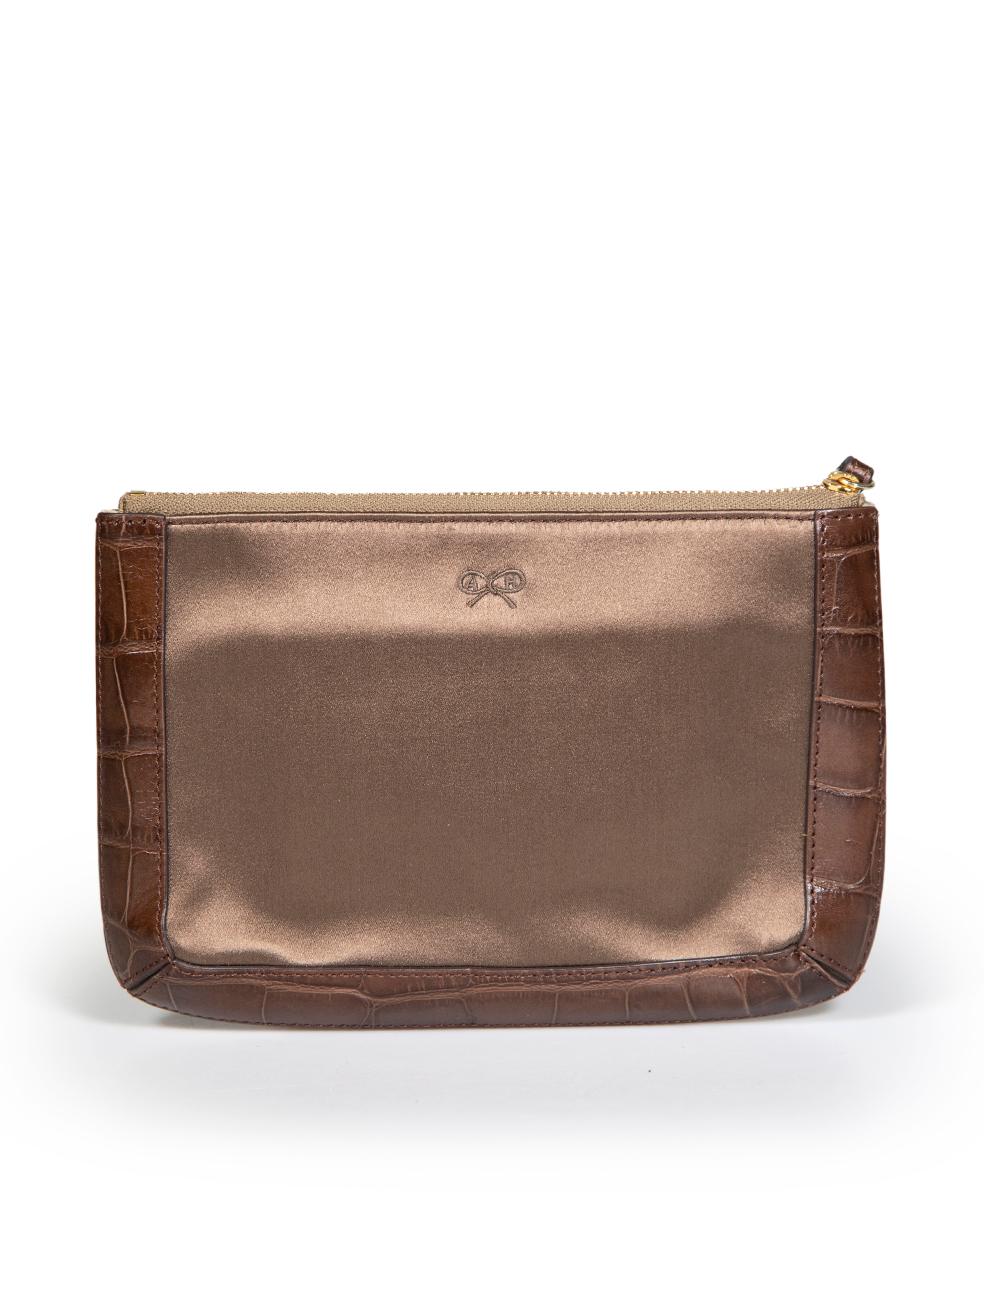 Anya Hindmarch Brown Satin Crocodile Trim Clutch In Excellent Condition For Sale In London, GB